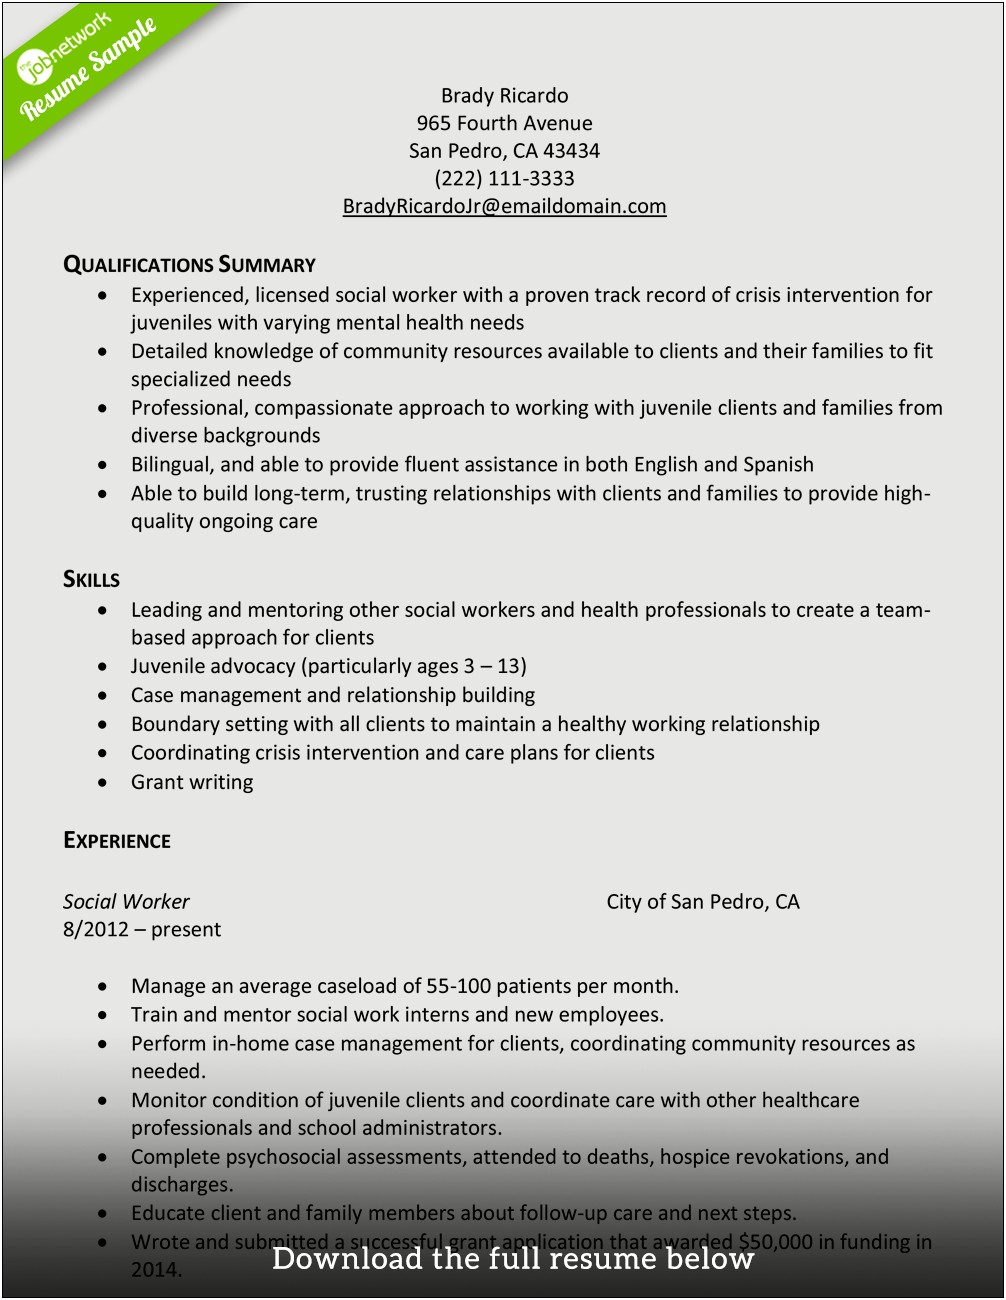 Worked With Proposal Writing Team Resume